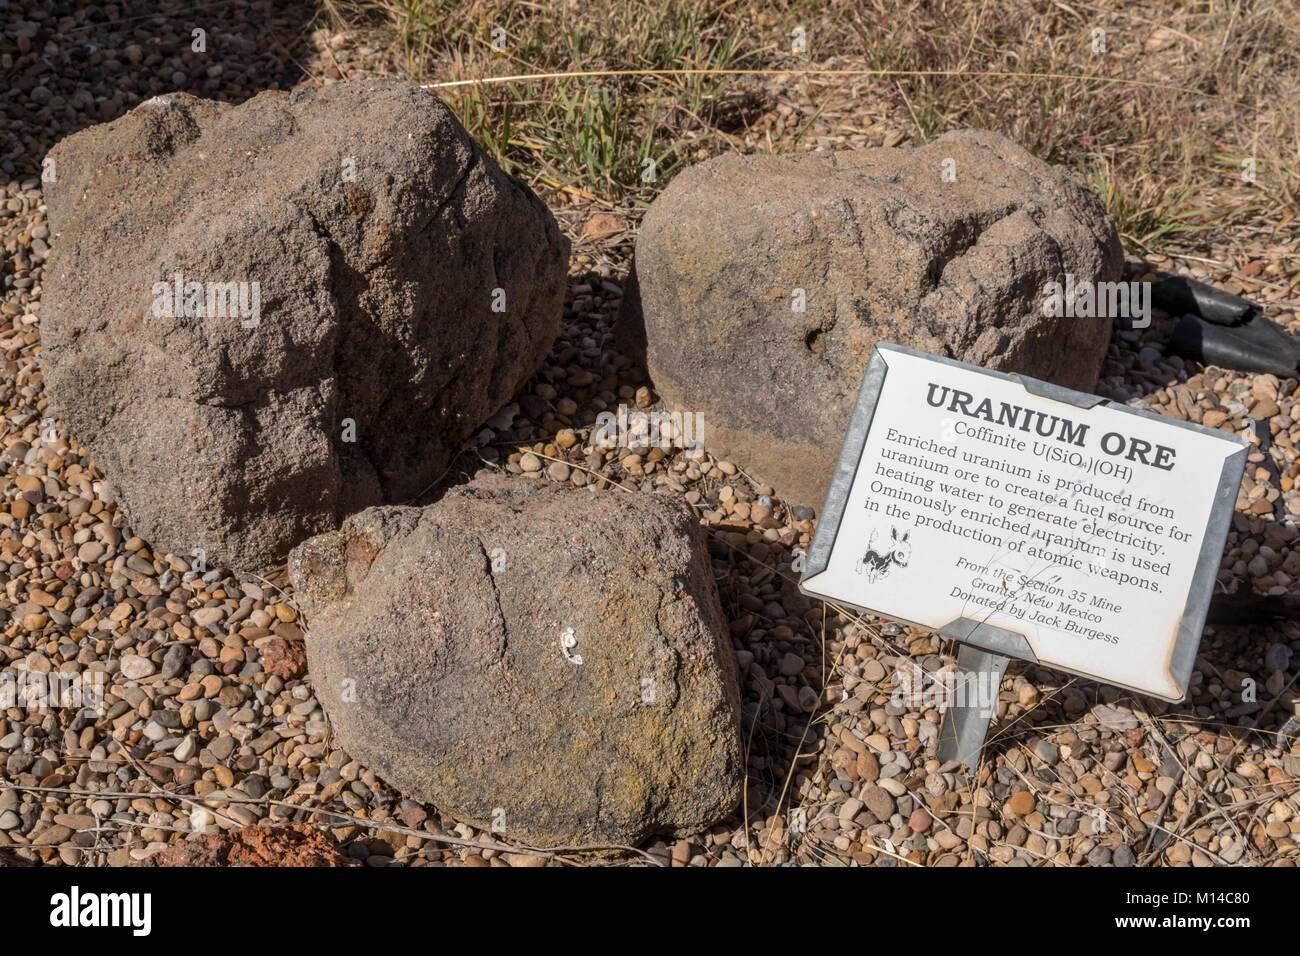 Fort Davis, Texas - Uranium ore in the Chihuahuan Desert Mining Heritage Exhibit at the Chihuahuan Desert Research Institute. The ore comes from a min Stock Photo